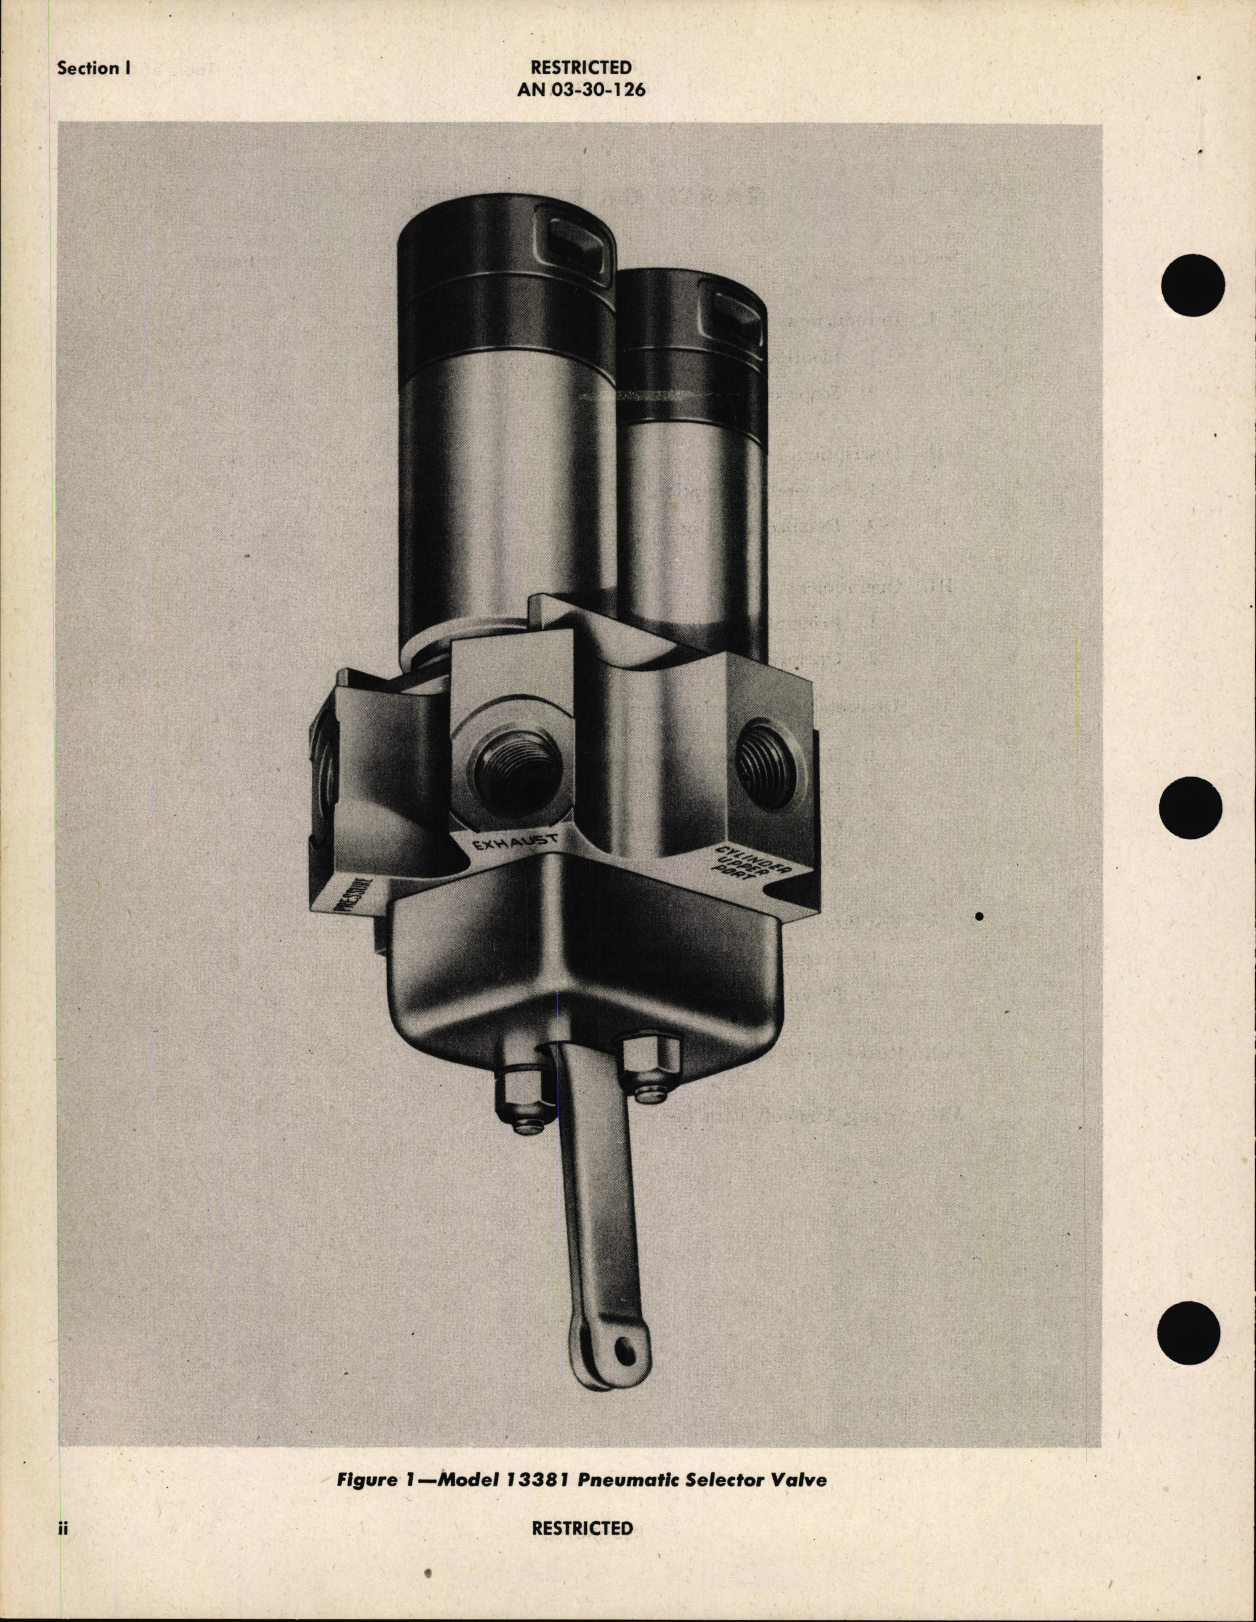 Sample page 4 from AirCorps Library document: Handbook of Overhaul Instructions with Parts Catalog for Solenoid Operated Four-Way Pneumatic Selector Valve 